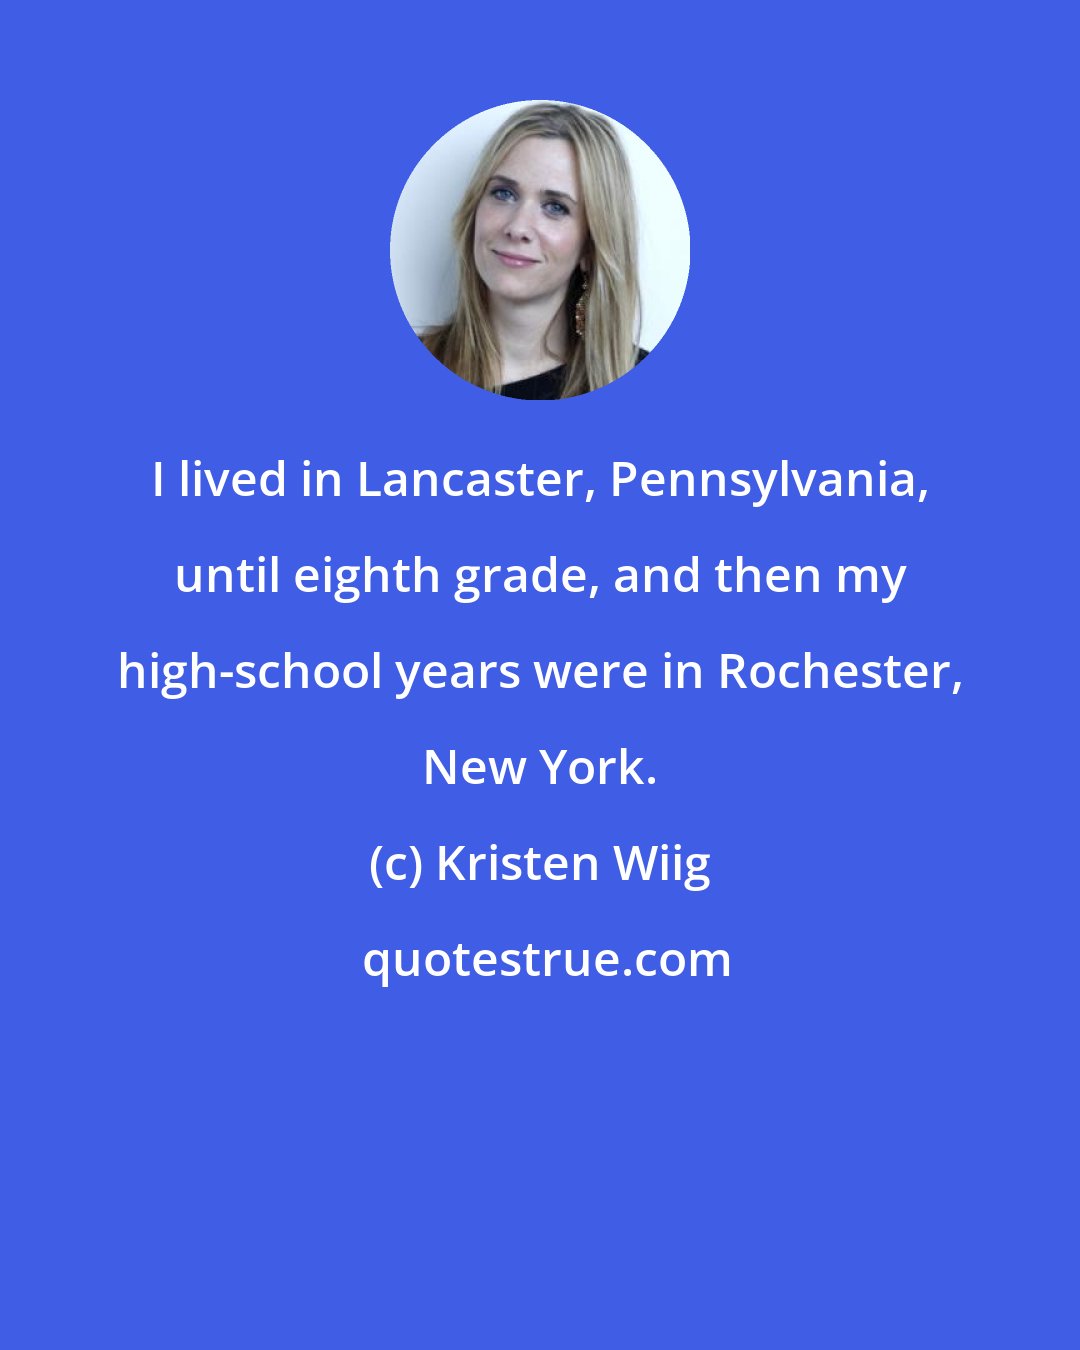 Kristen Wiig: I lived in Lancaster, Pennsylvania, until eighth grade, and then my high-school years were in Rochester, New York.